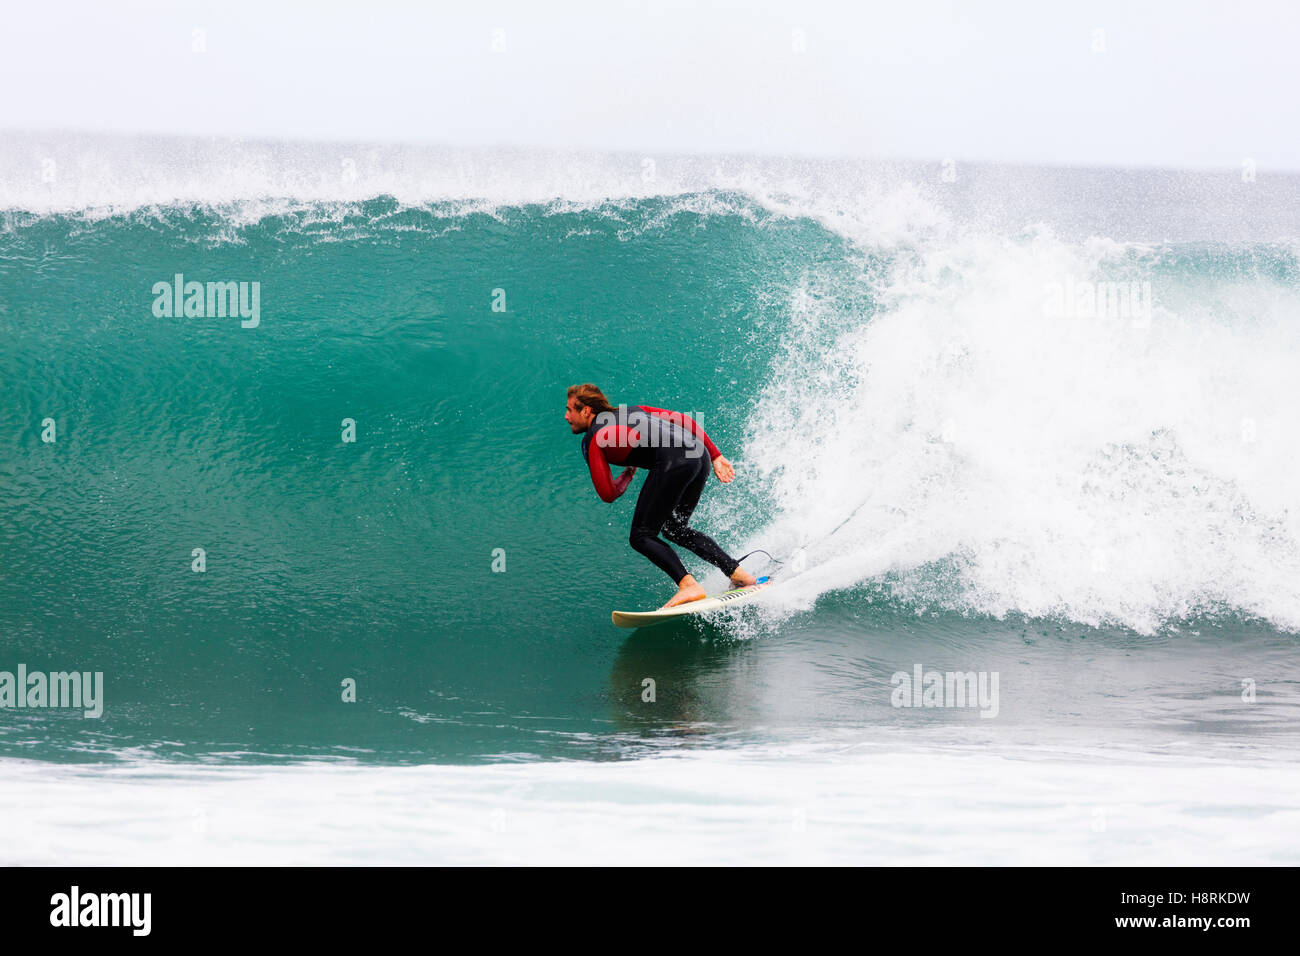 South Africa, Eastern Cape, Jeffery's Bay, surfer at Supertubes wave Stock Photo